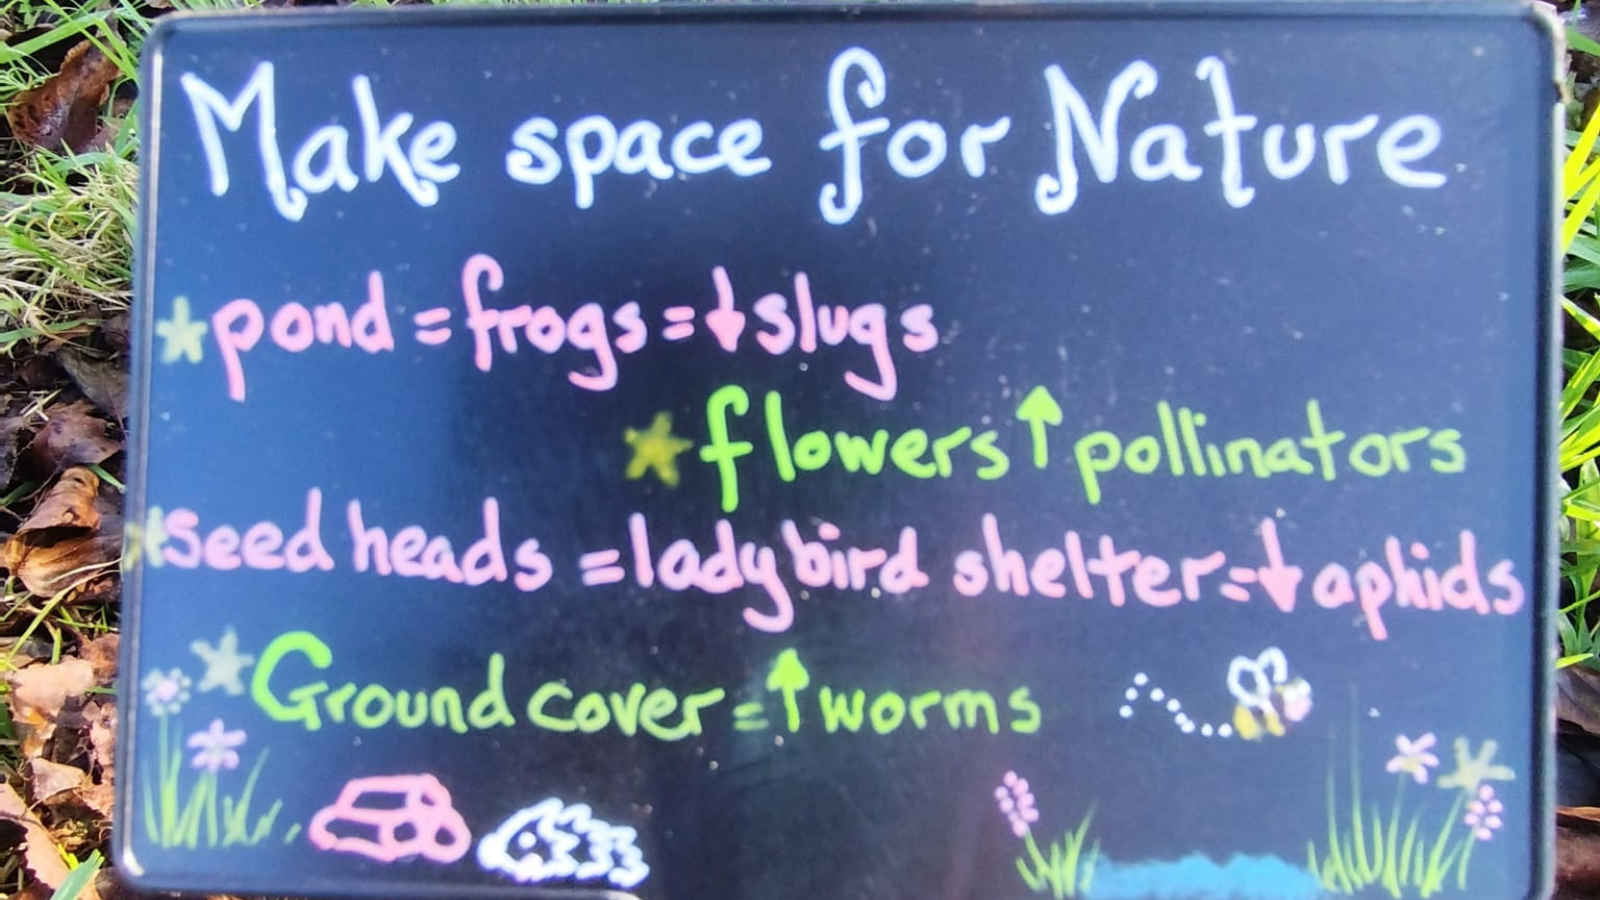 'Make space for nature' sign